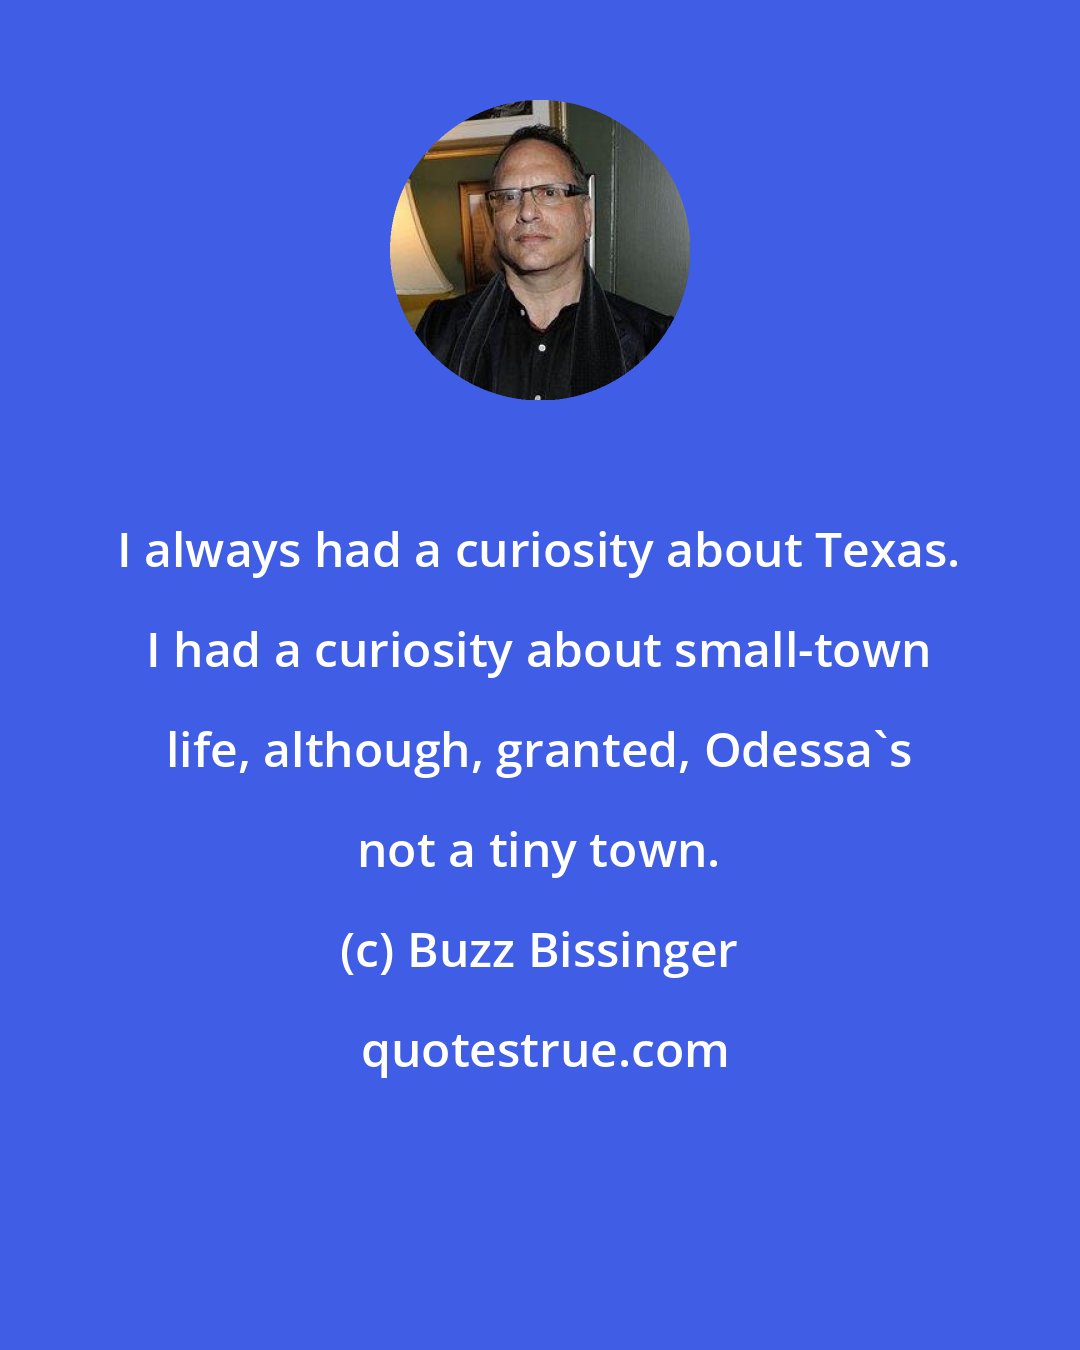 Buzz Bissinger: I always had a curiosity about Texas. I had a curiosity about small-town life, although, granted, Odessa's not a tiny town.